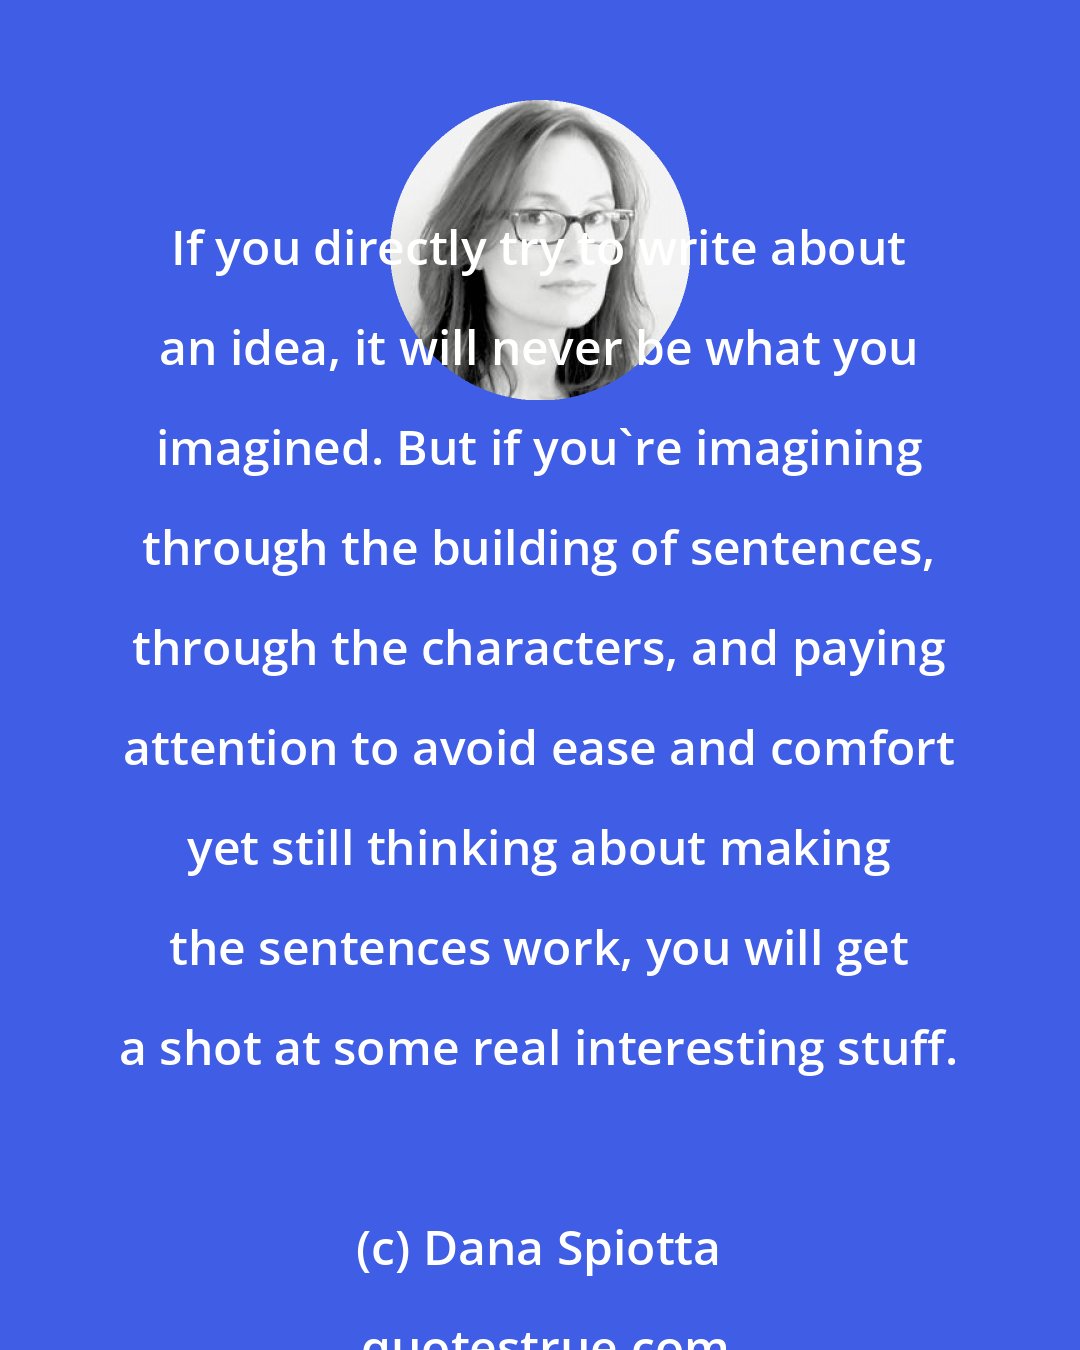 Dana Spiotta: If you directly try to write about an idea, it will never be what you imagined. But if you're imagining through the building of sentences, through the characters, and paying attention to avoid ease and comfort yet still thinking about making the sentences work, you will get a shot at some real interesting stuff.